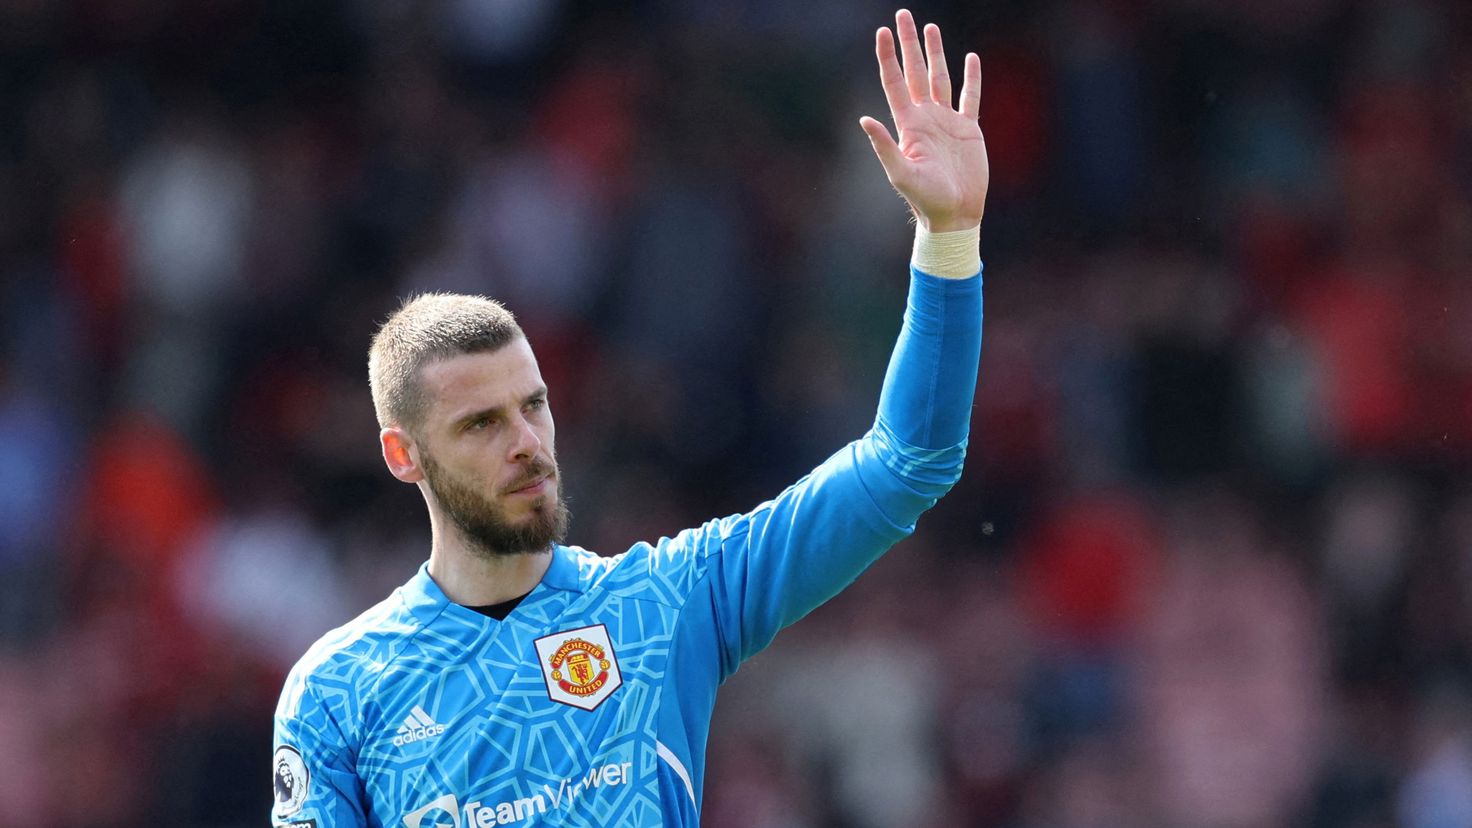 End to the soap opera: De Gea is no longer at United
